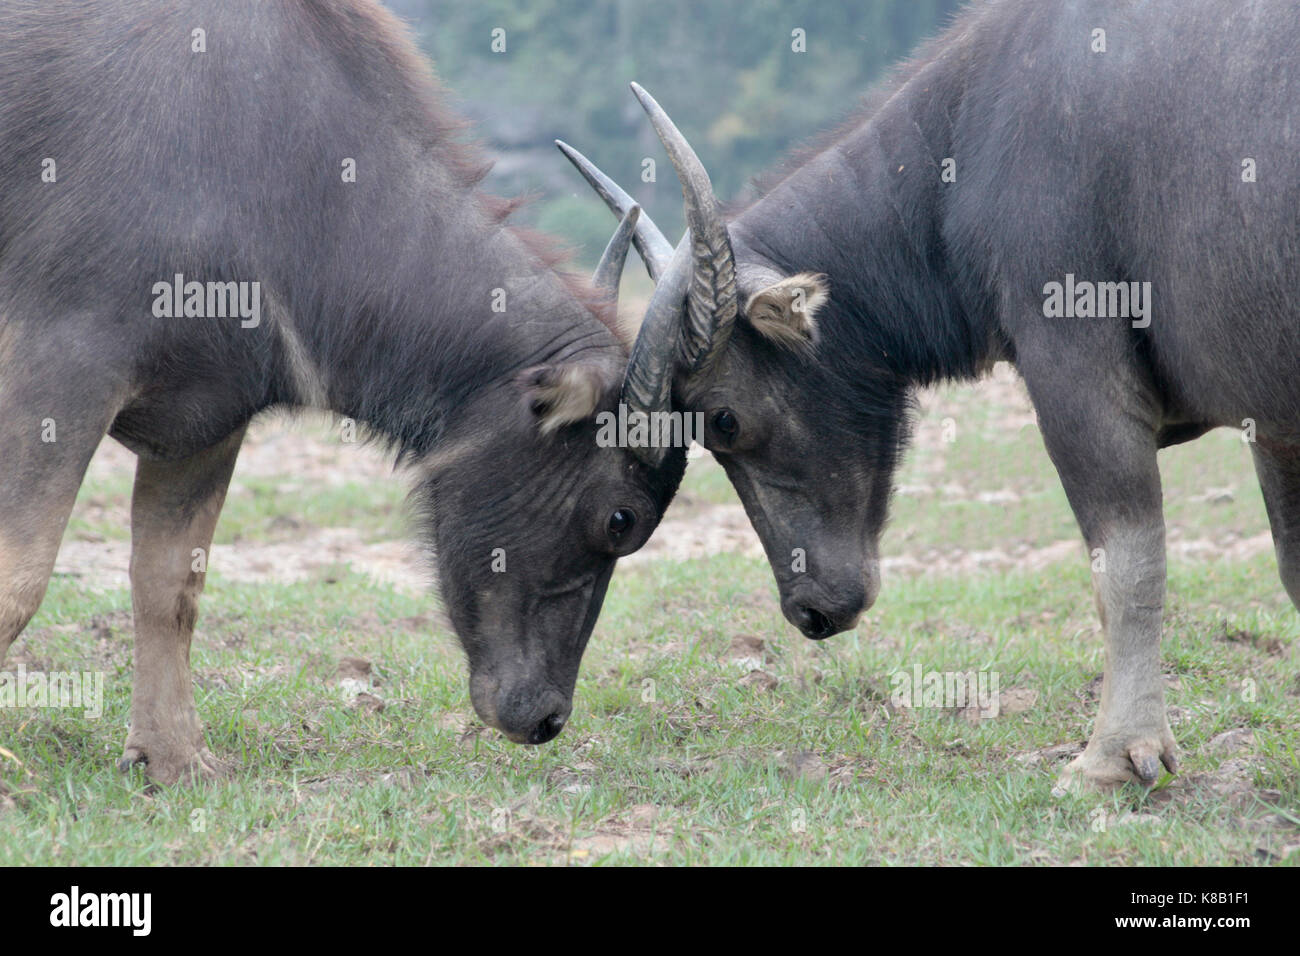 A pair of evenly matched adolescent water buffalo (bubalus bubalis) testing their strength against one another to show superiority. Stock Photo